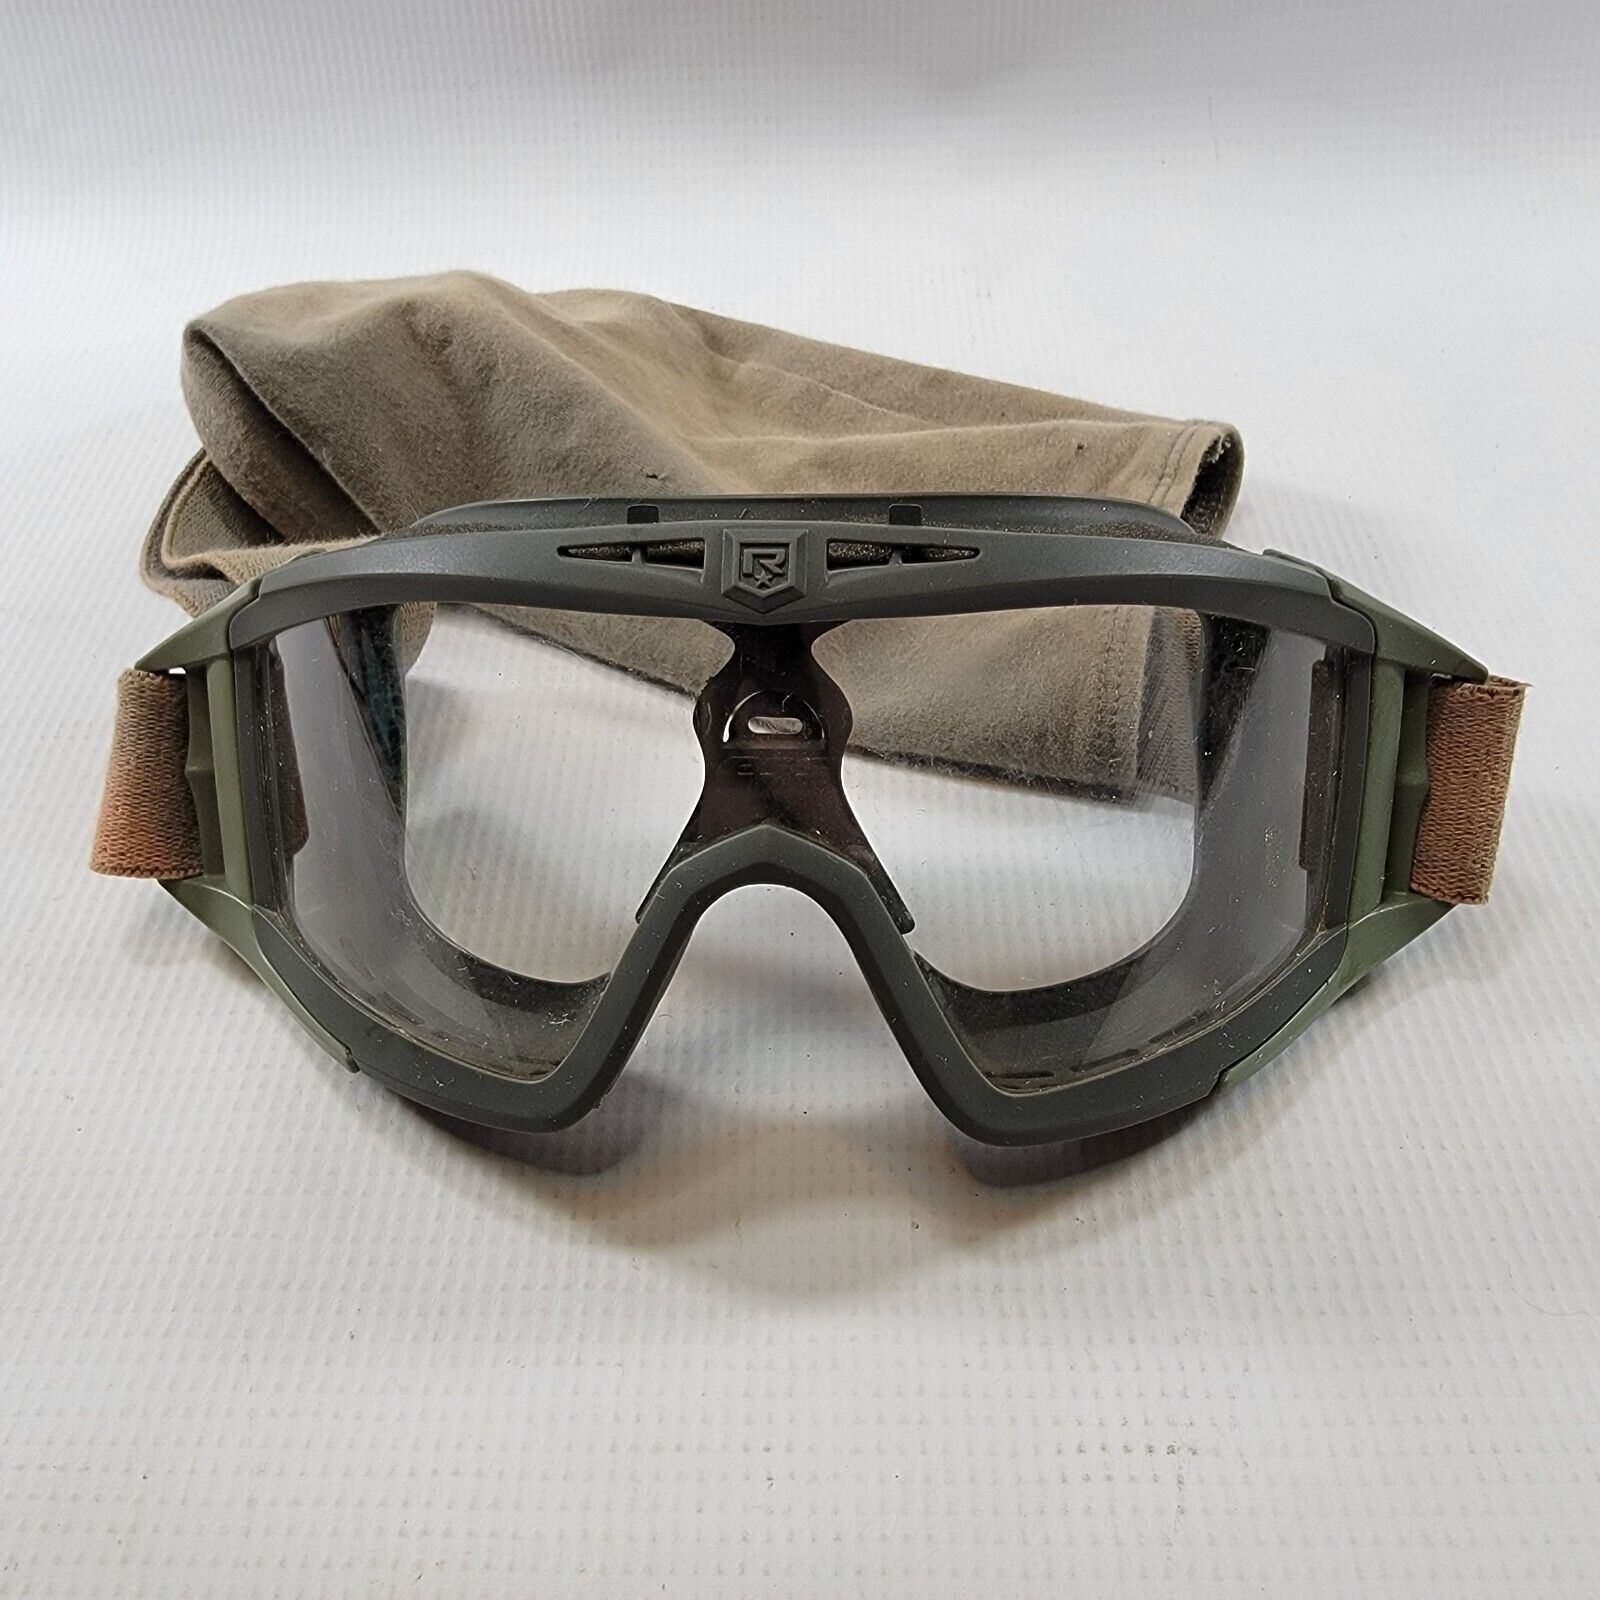 Military Revision ESS Apel Military Ballistic Goggles Green Tan Clear Lens Used